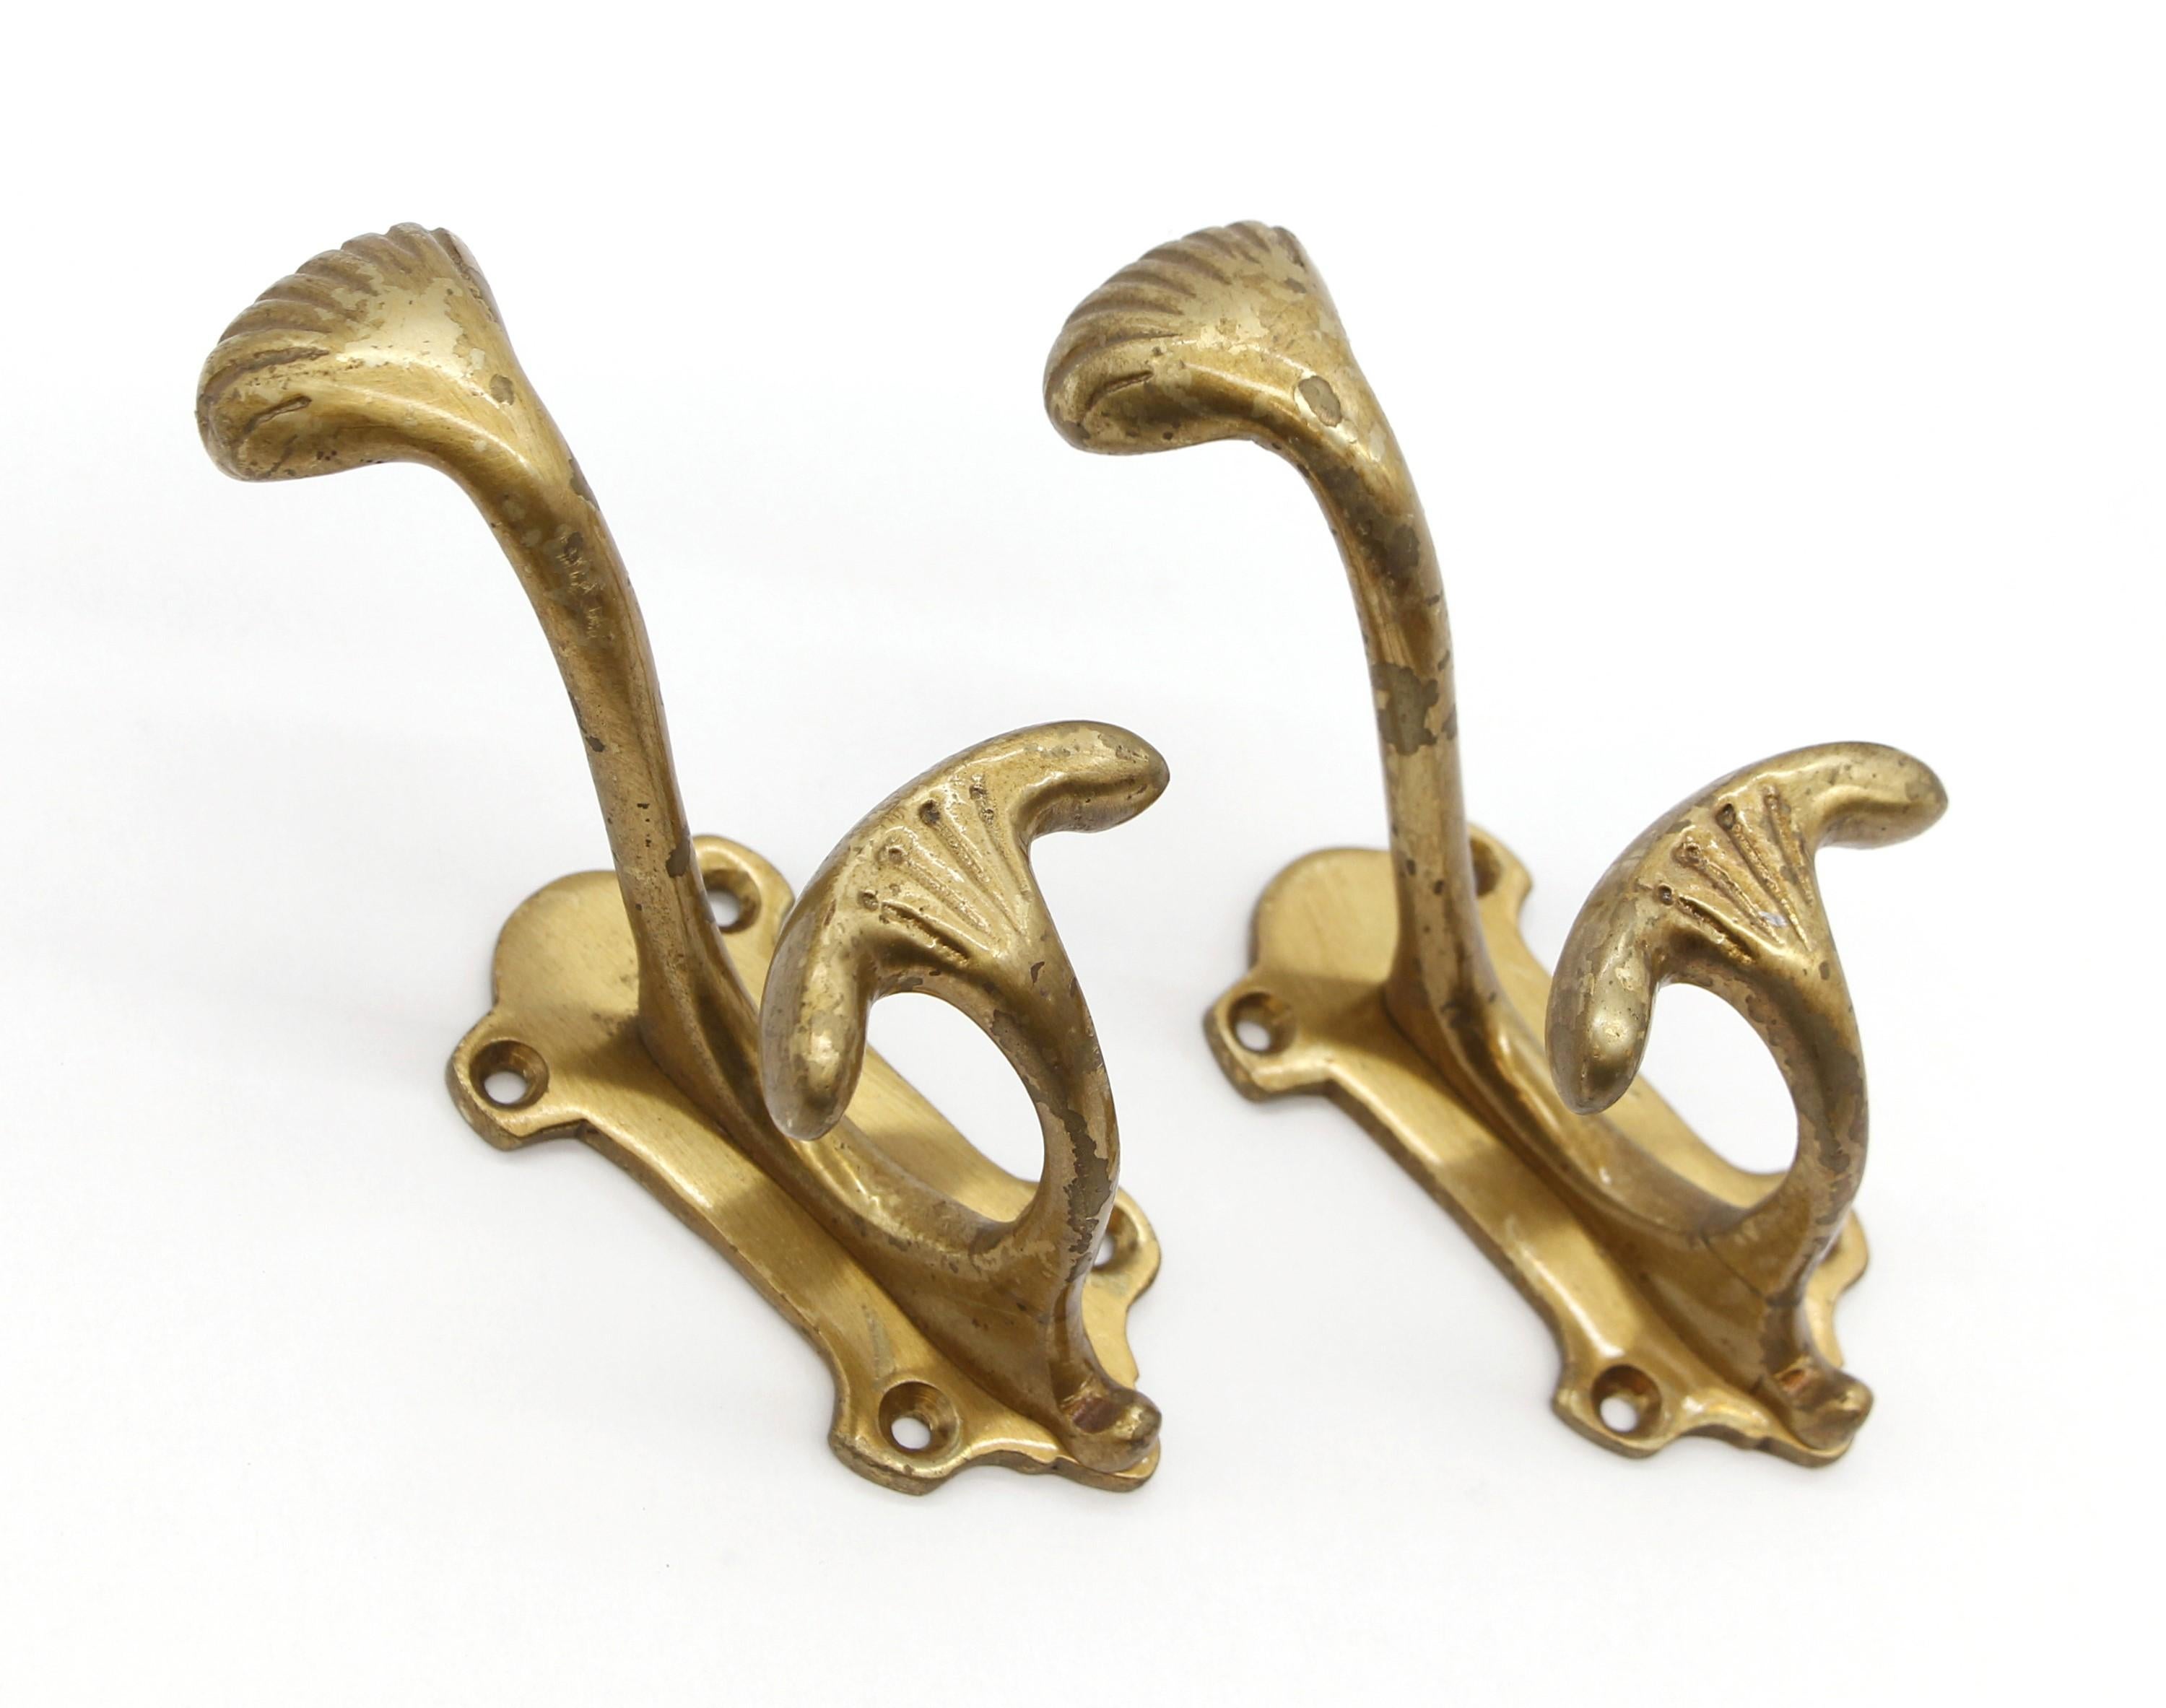 Early 20th Century brass double arm hooks with an Art Deco style. Good condition with appropriate wear from age. Priced as a pair. Please note, this item is located in our Scranton, PA location.